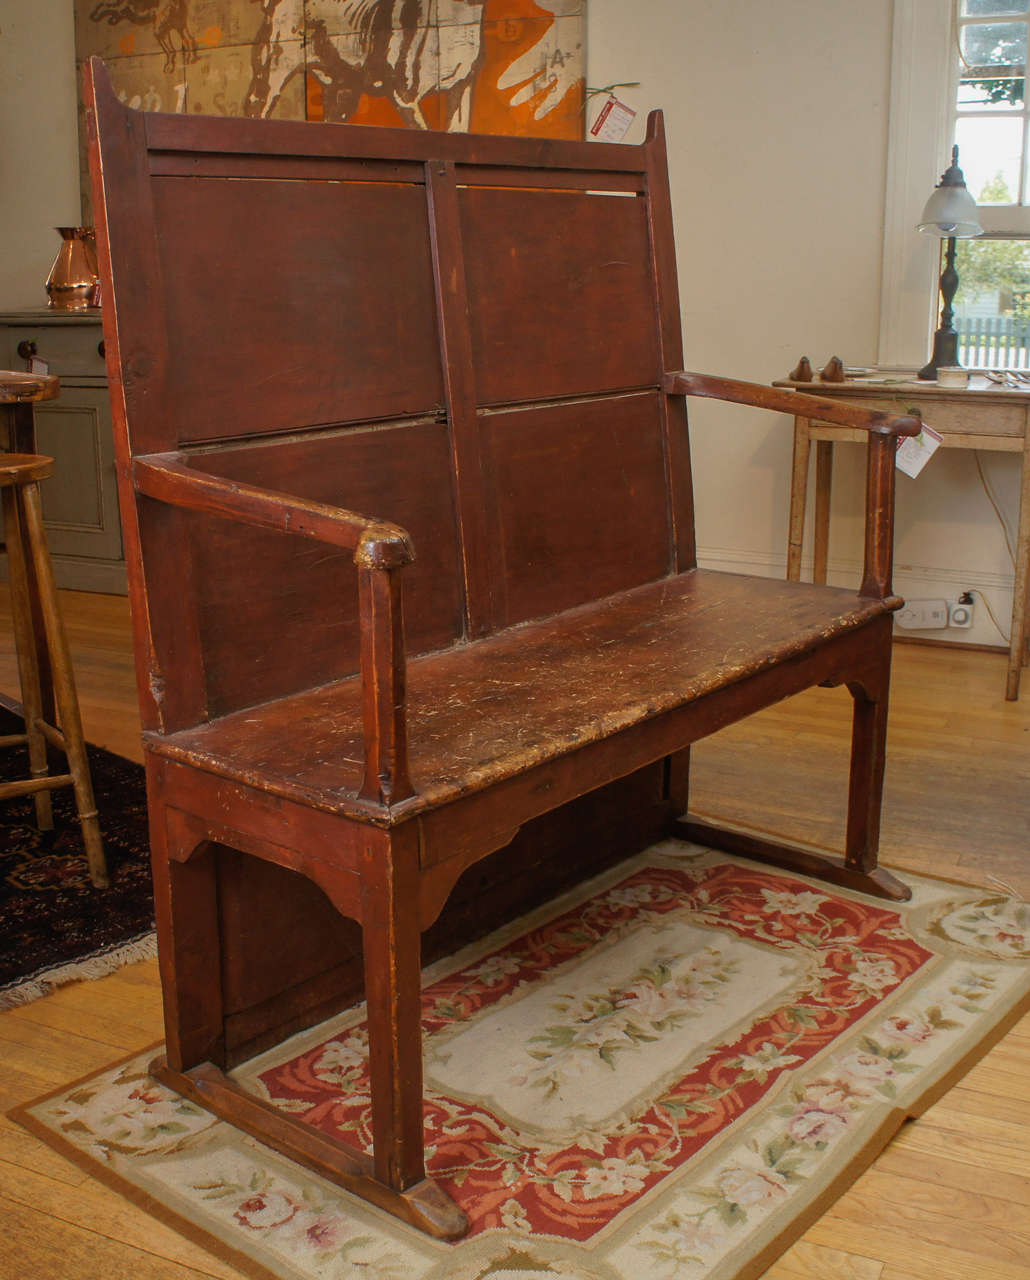 Exceptional is a good way to begin to describe this Welsh sledge foot George III settle. Its design is simple yet very unusual. The red paint is worn and authentic. A home in a mudroom, table side or den would be perfect for this early seat.